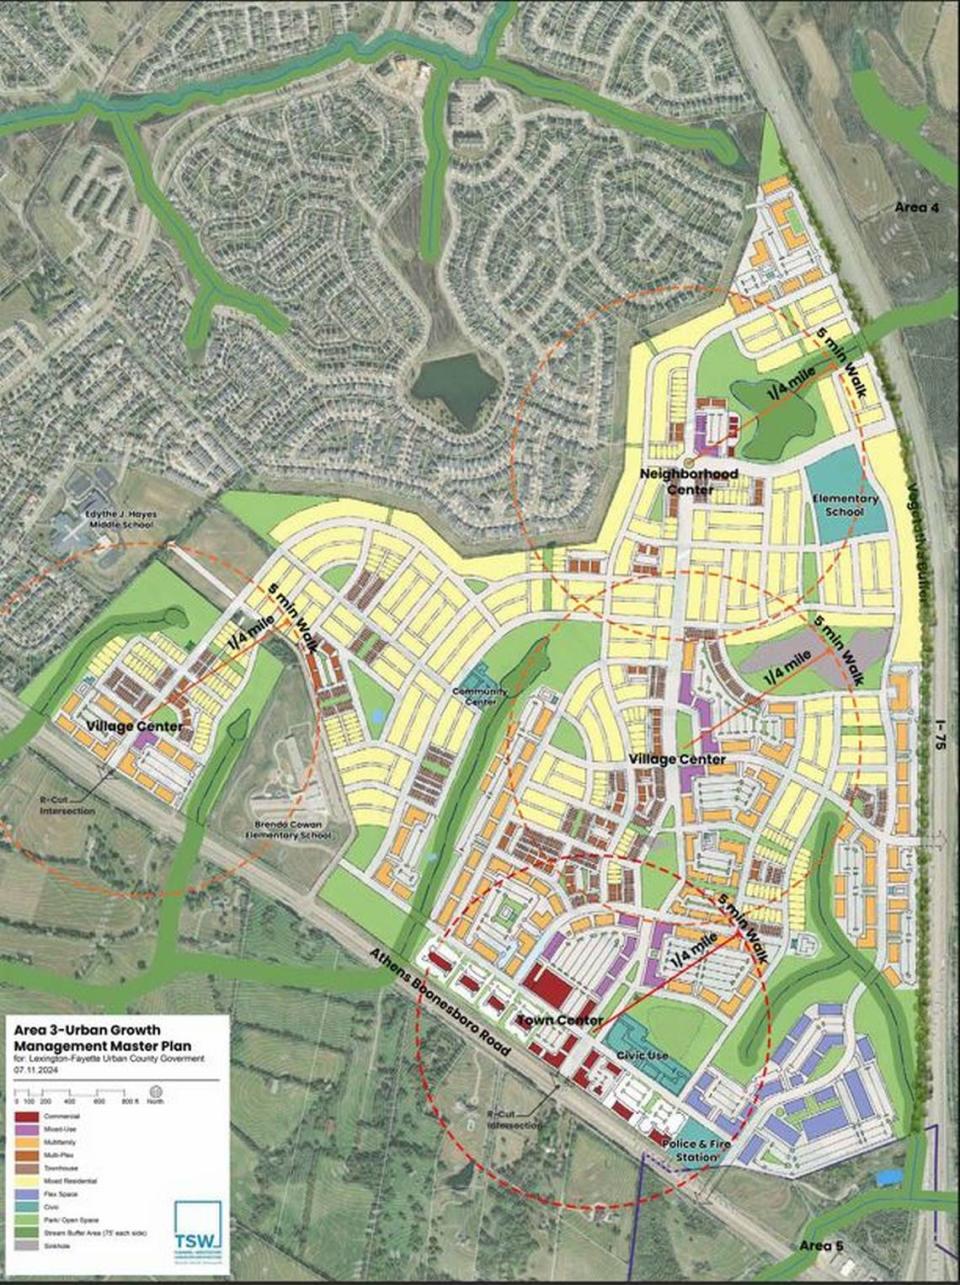 An area near Athens Boonesboro Road and Interstate 75 is part of the 2,800 acres to be added to the city’s expansion area.